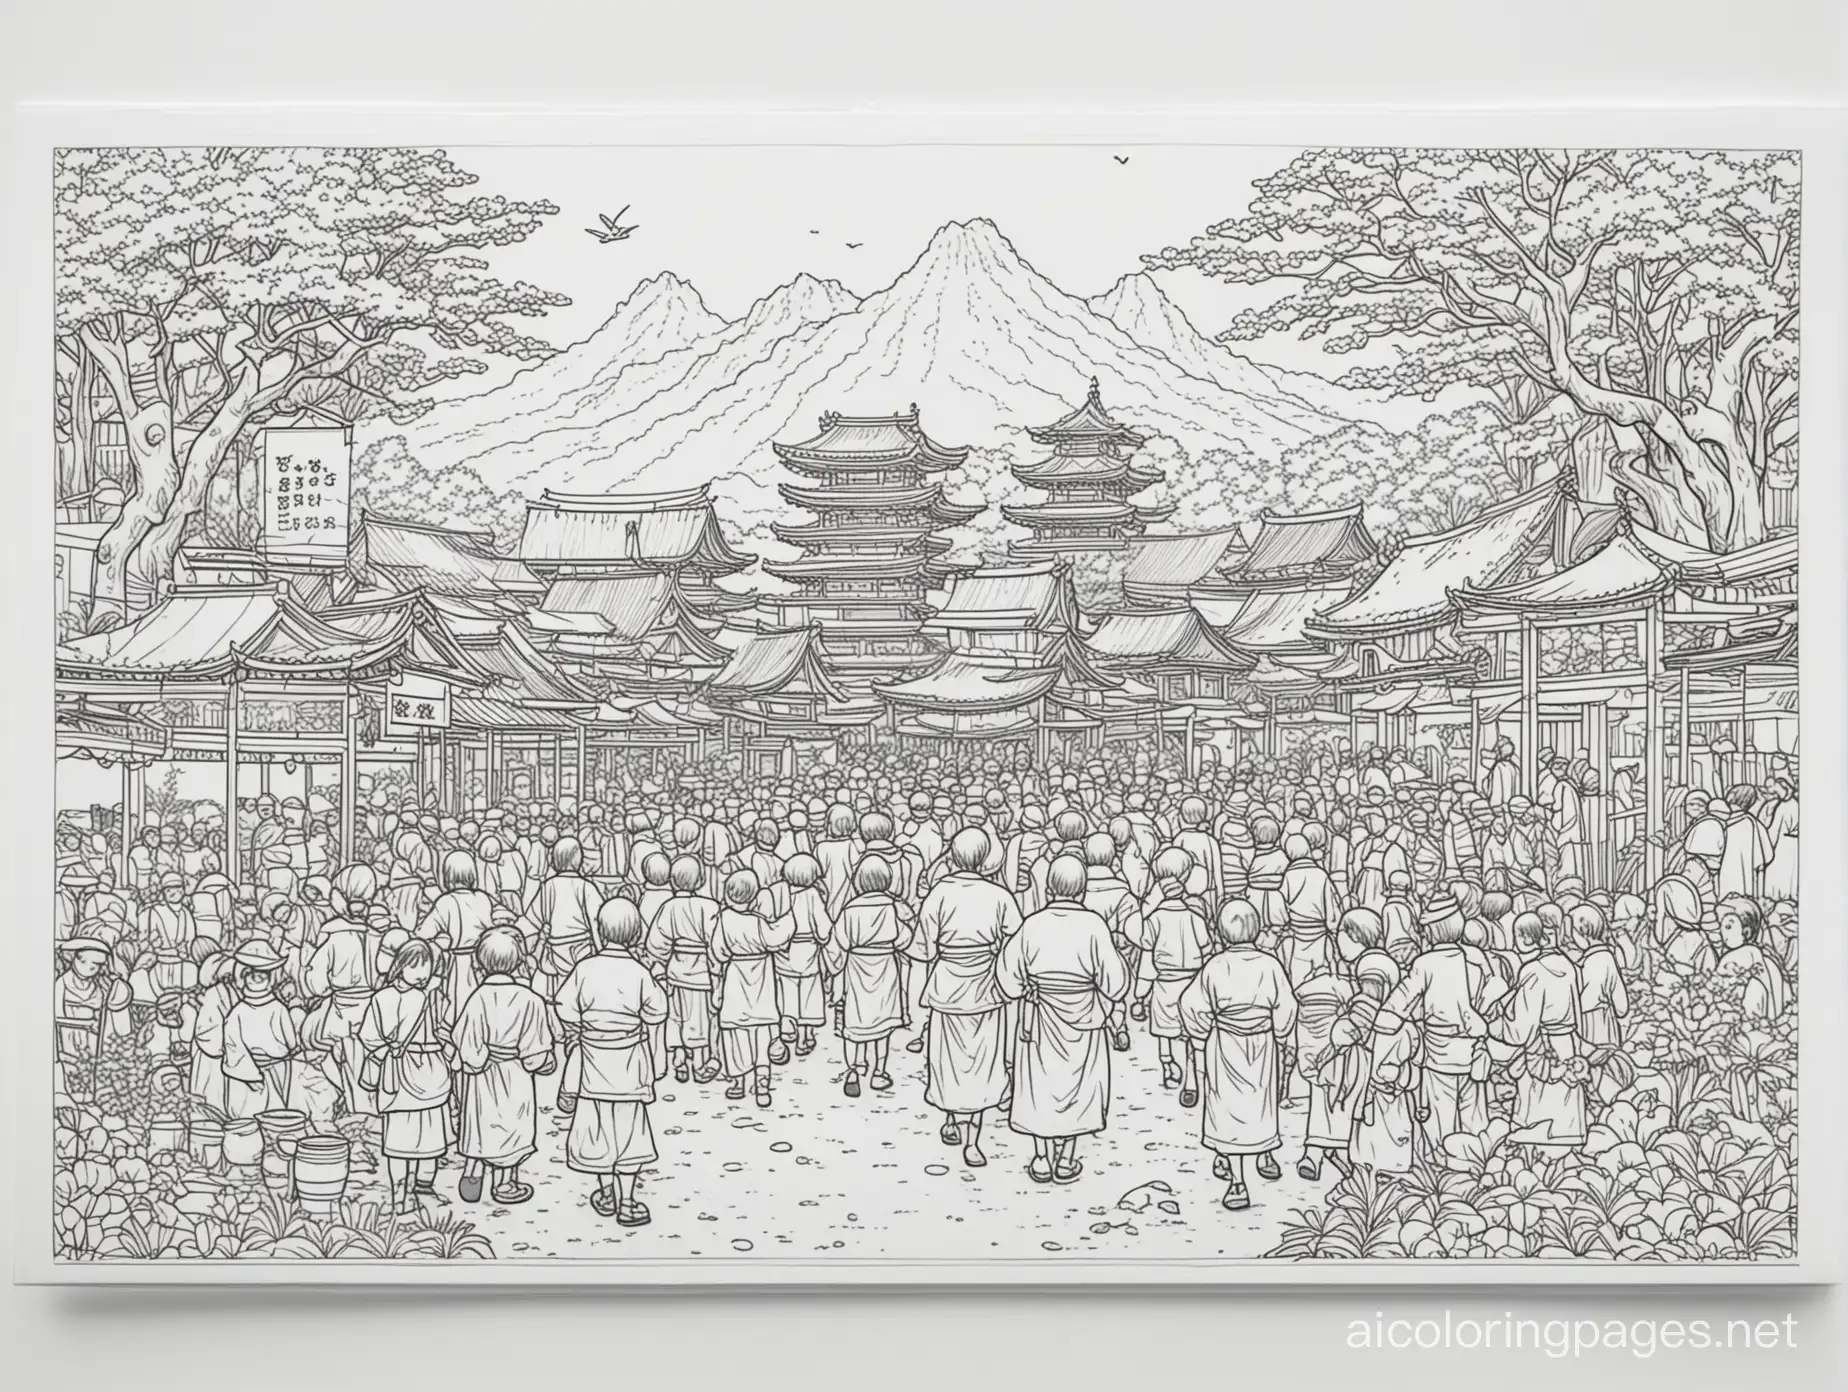 Showa Festival, Coloring Page, black and white, line art, white background, Simplicity, Ample White Space. The background of the coloring page is plain white to make it easy for young children to color within the lines. The outlines of all the subjects are easy to distinguish, making it simple for kids to color without too much difficulty